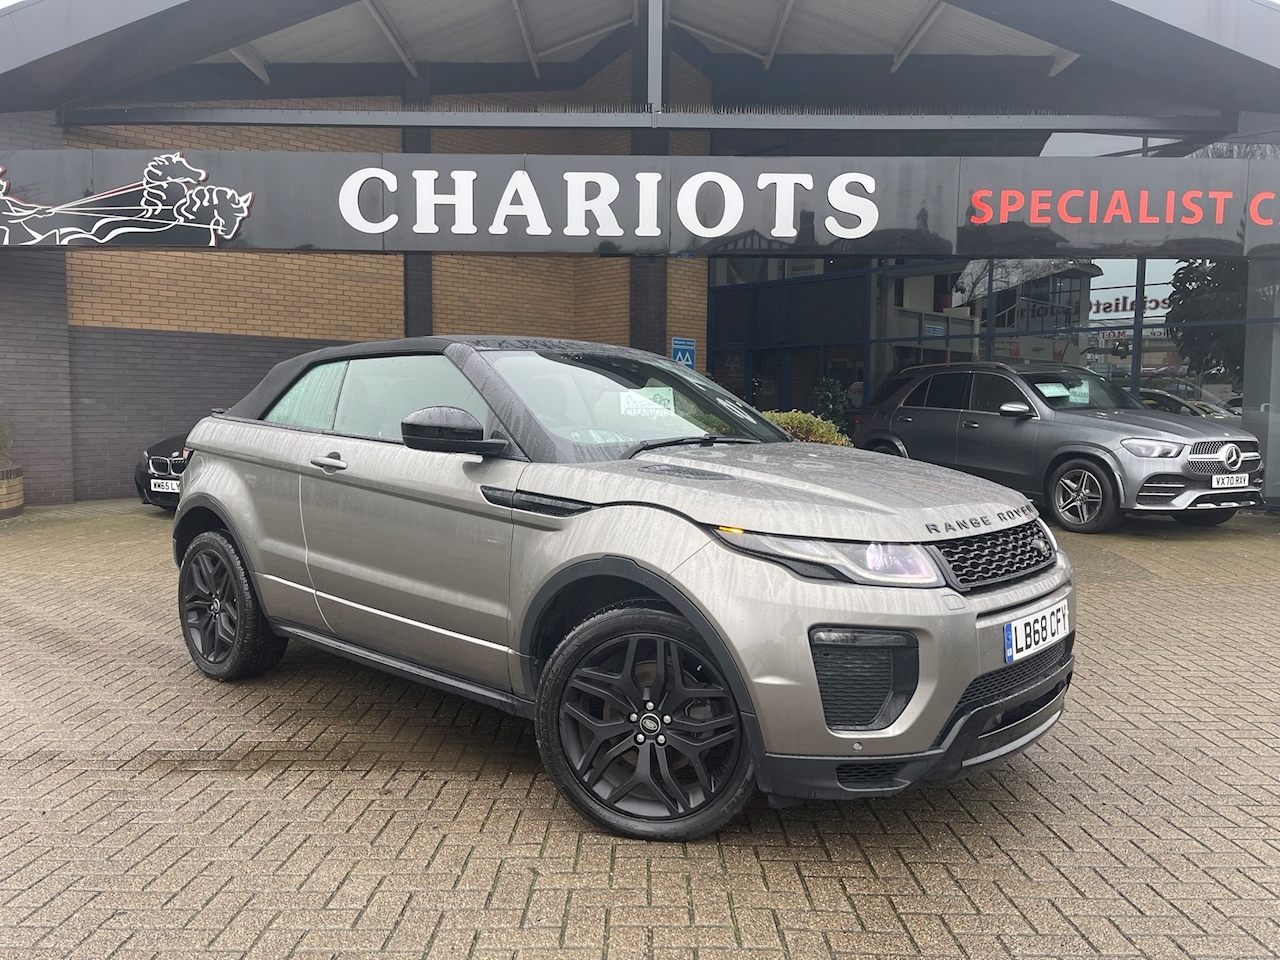 Range Rover Evoque TD4 HSE Dynamic 2.0 2dr Convertible Automatic Diesel